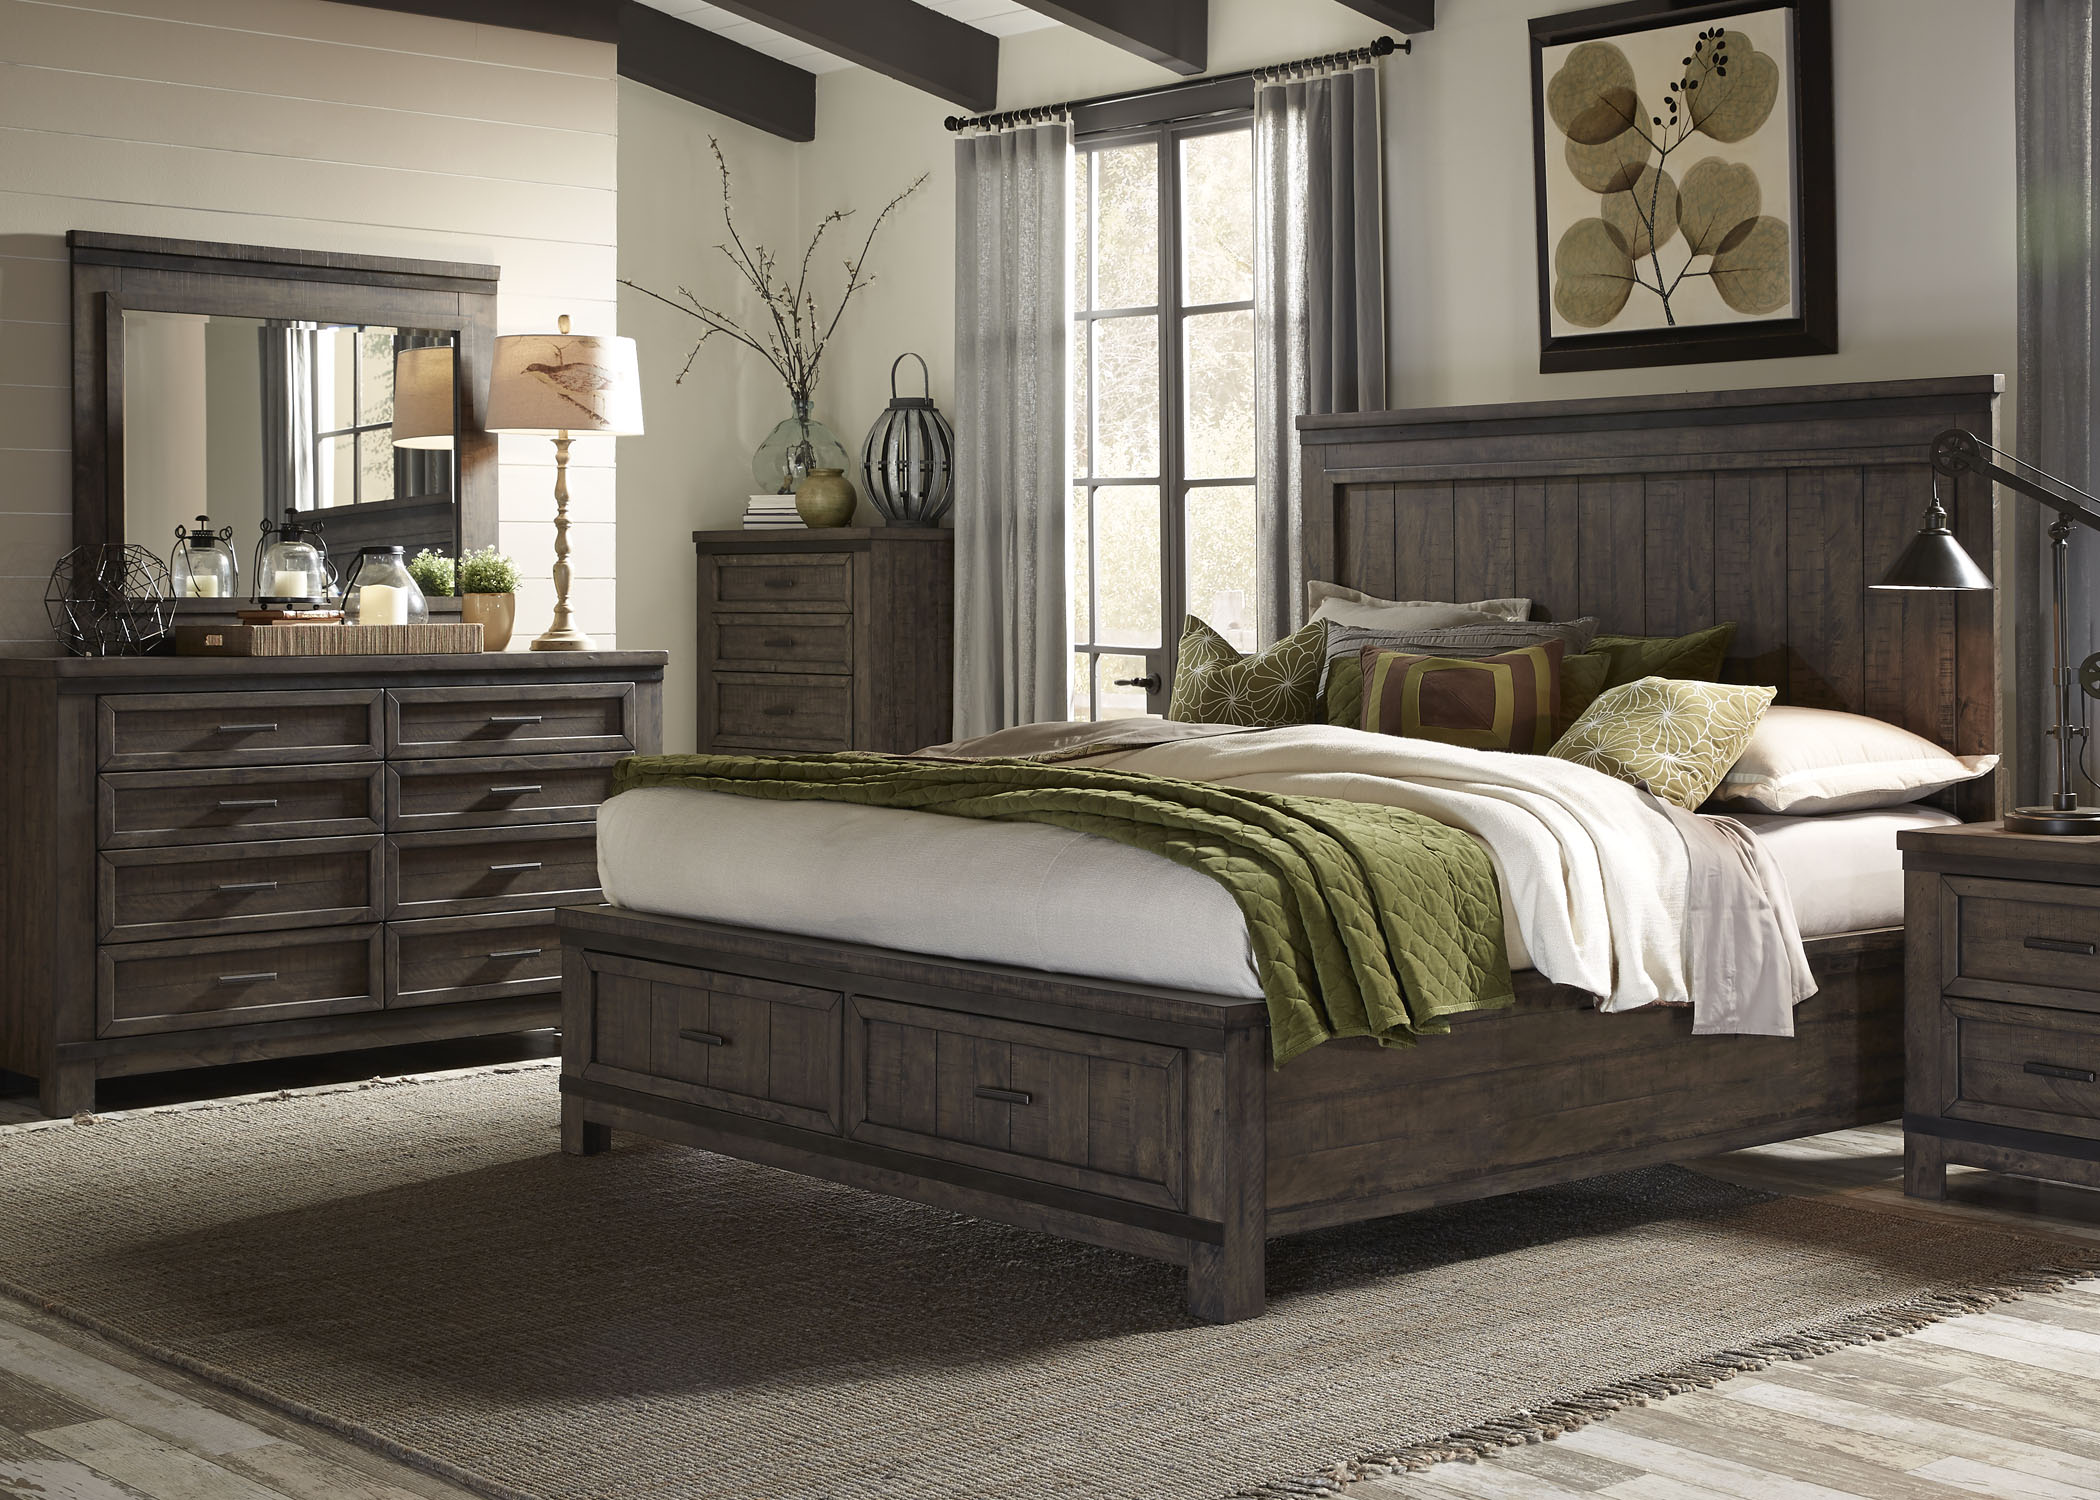 Liberty Furniture Thornwood Hills Bedroom King Storage Bed, Dresser, Mirror, and Chest Collection